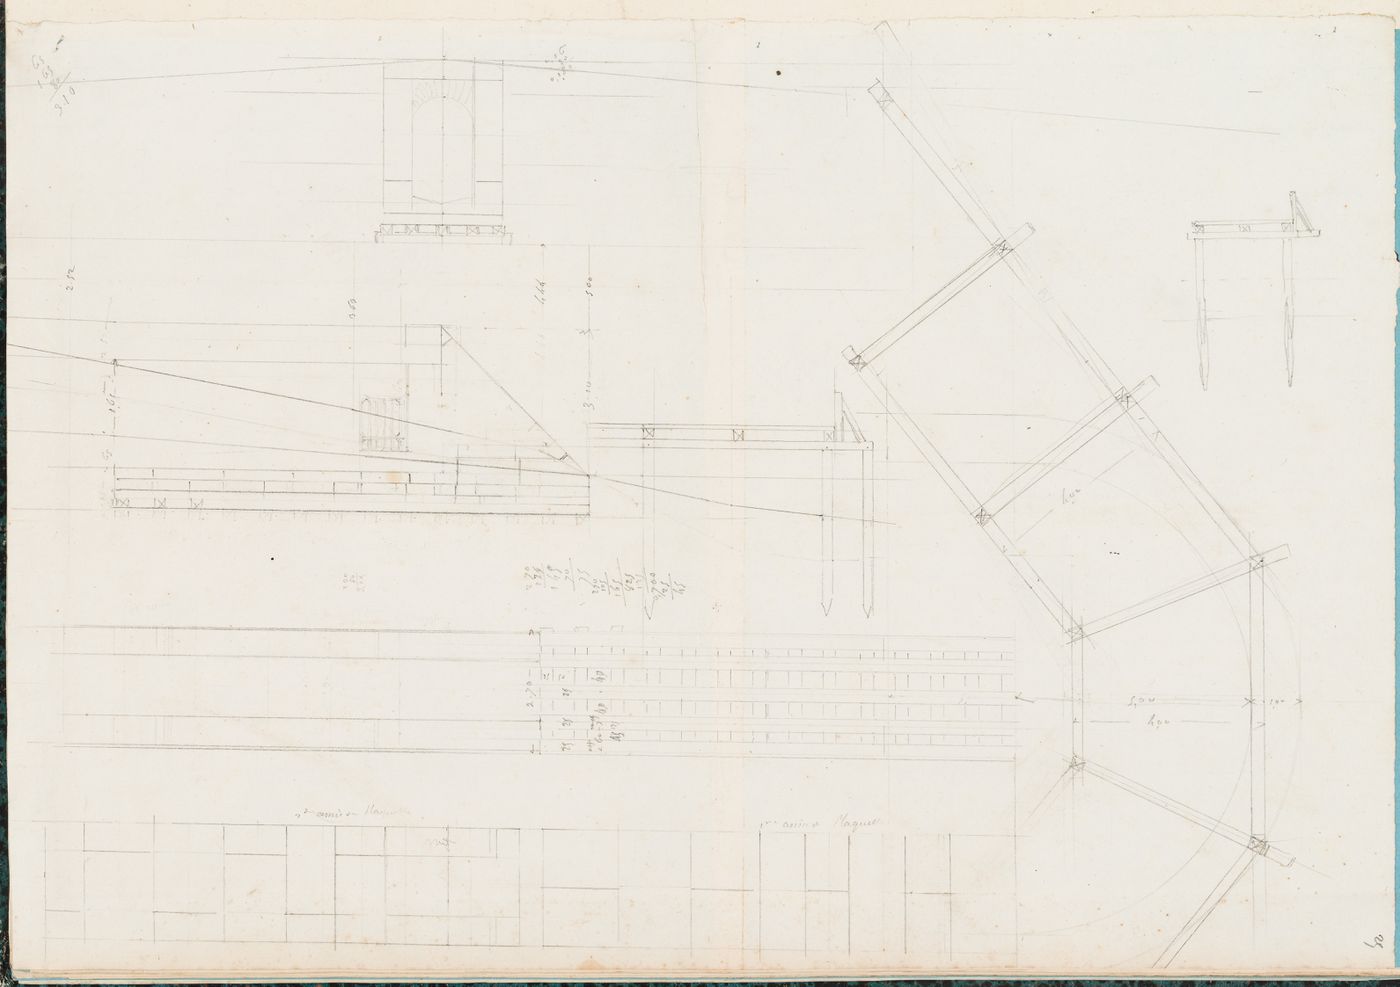 Preliminary drawings, probably for a sewer, Parc de Clichy